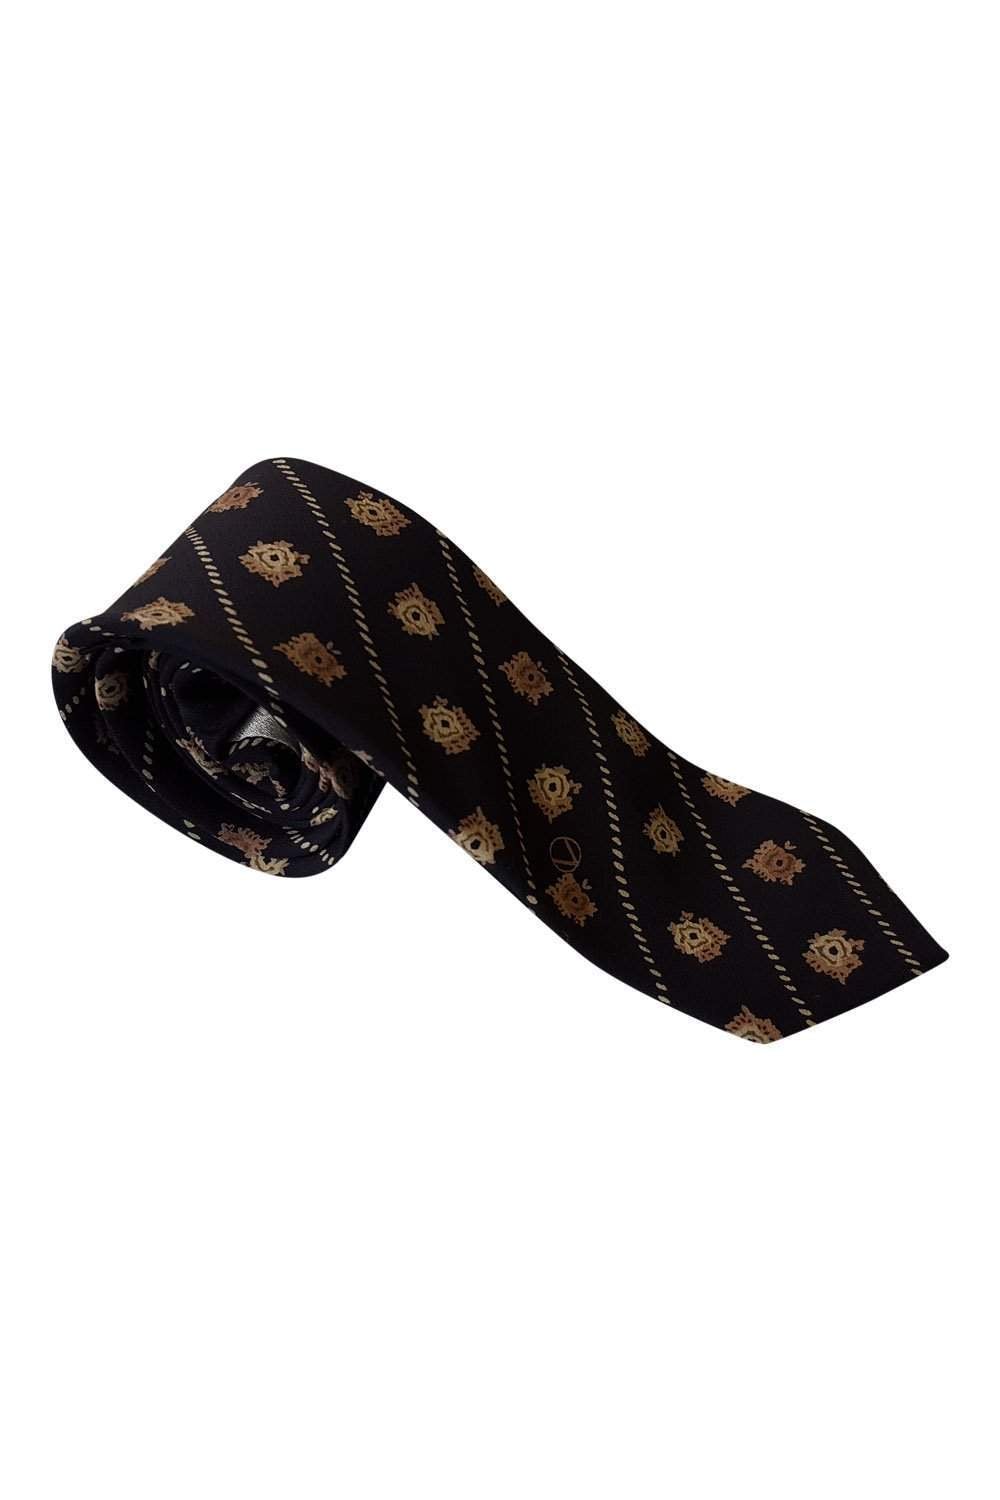 VALENTINO Vintage Silk Black Tie Abstract Print Repeat (55")-Valentino-The Freperie